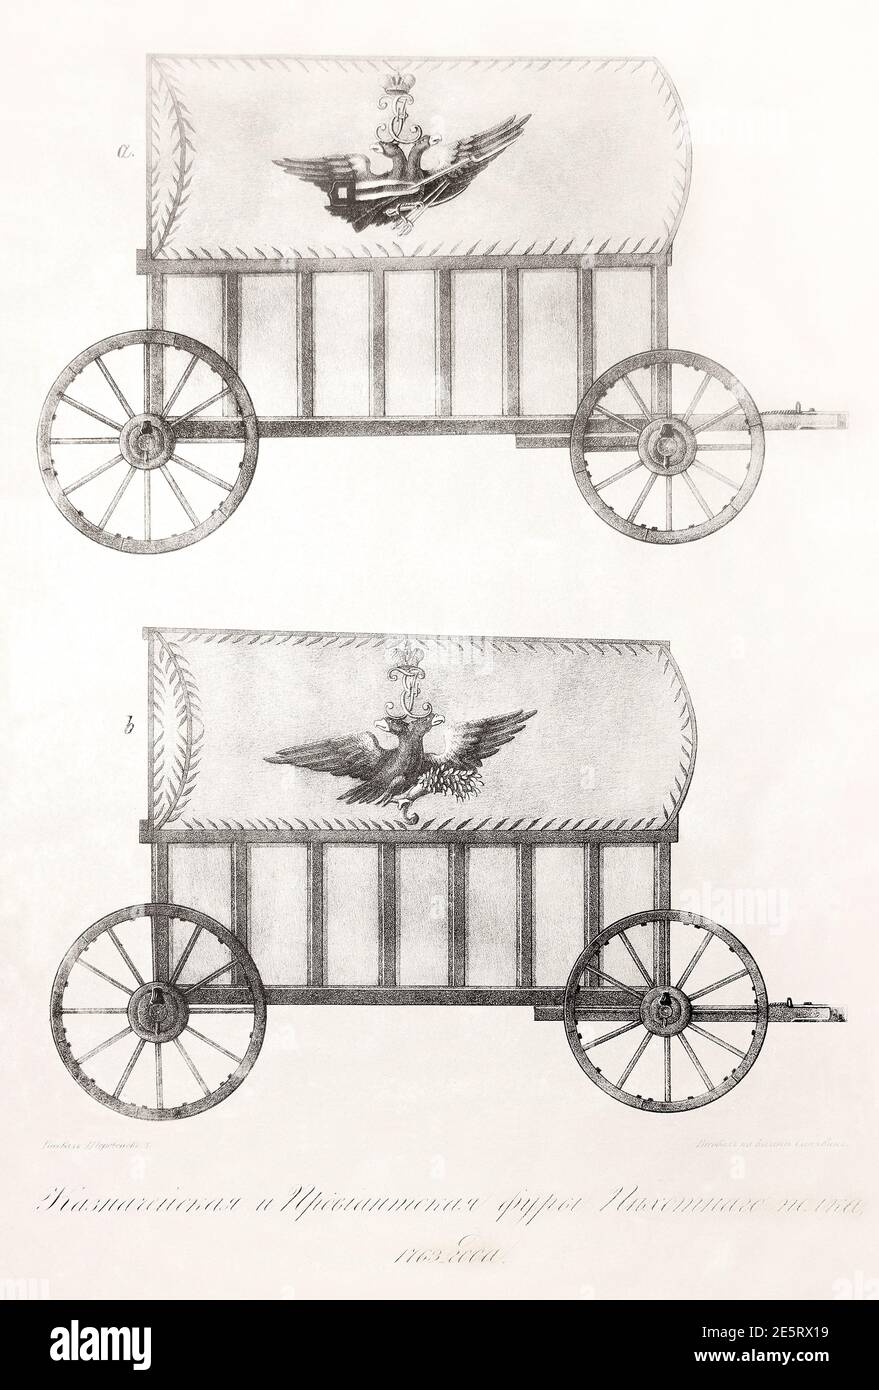 Treasury and Provision wagons of the Infantry Regiment in the Russian Empire in 1763. Stock Photo